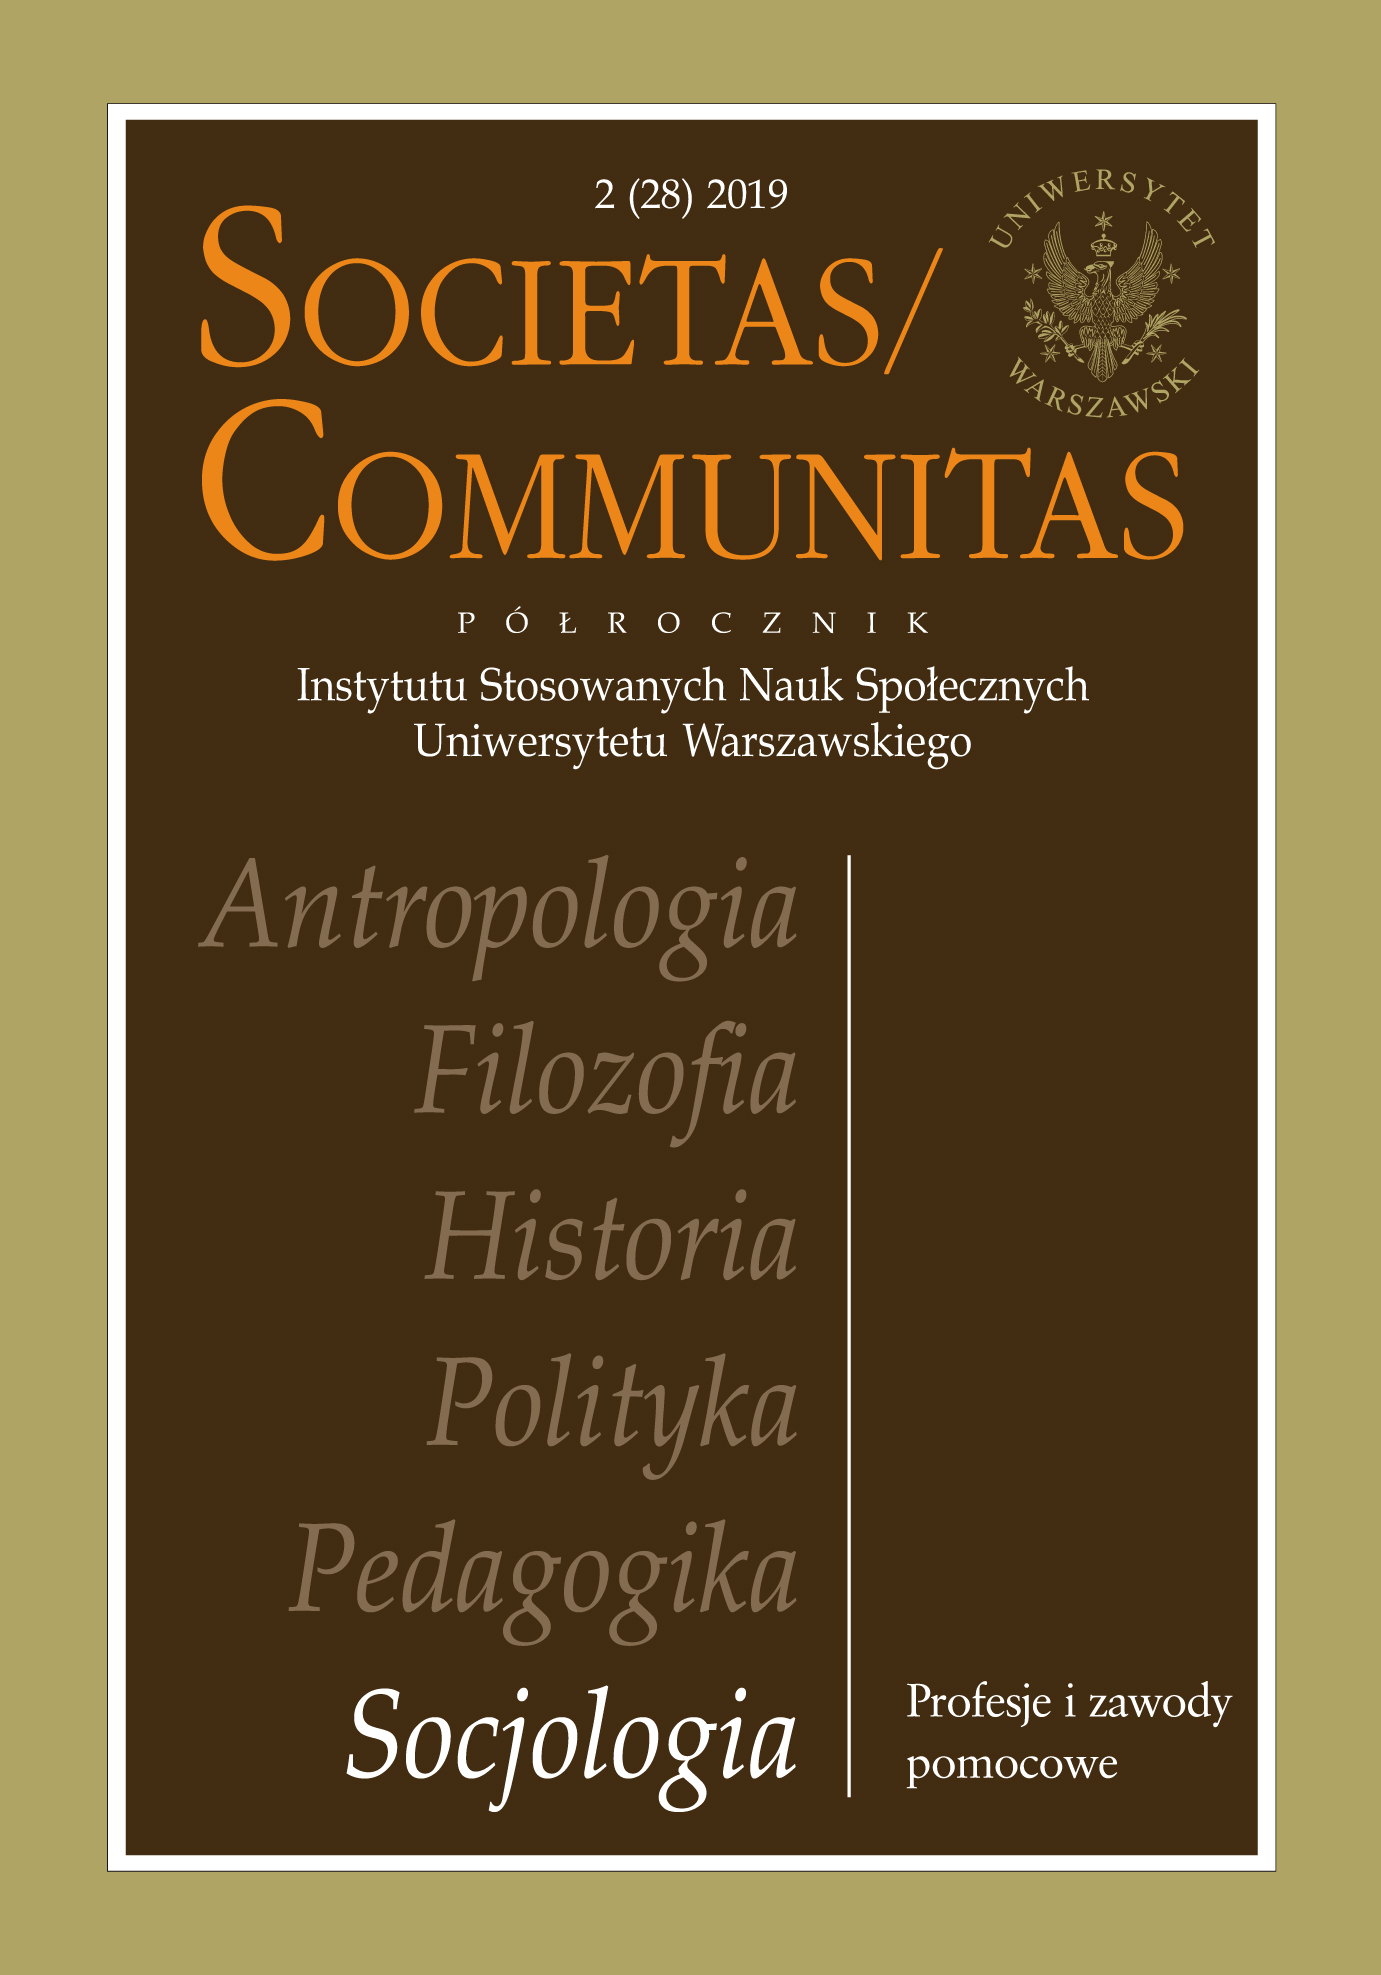 'Social work in relation to old and new helping occupations: mutual positioning and the building up of a common identity in the helping professions'. A seminar and conference series by the Social Work Section of the Polish Sociological Association Cover Image